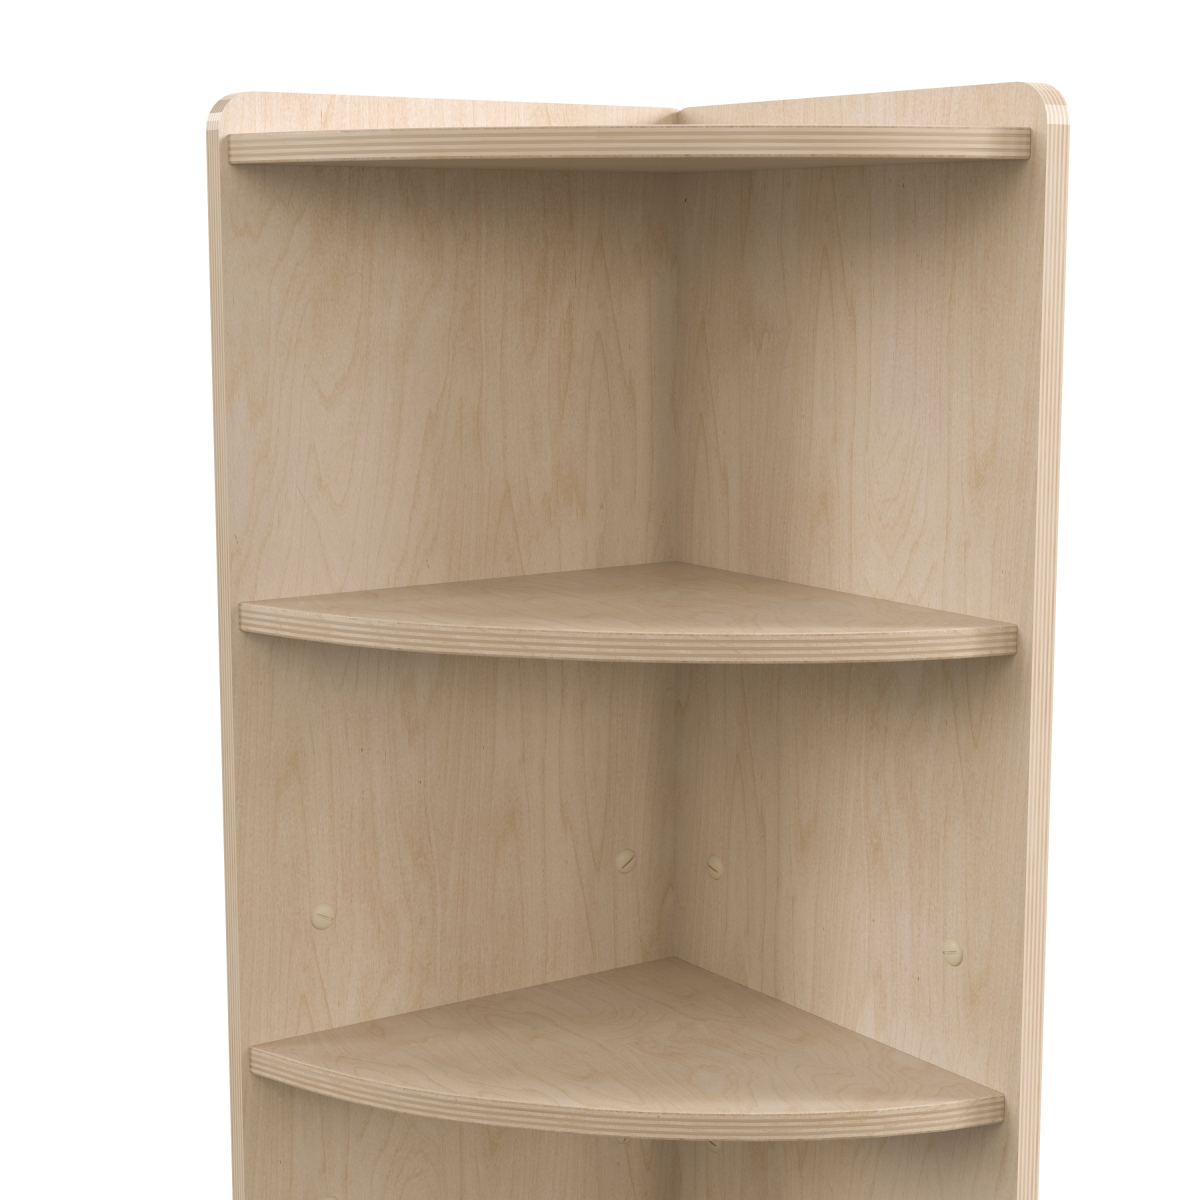 Picture of Flash Furniture MK-KE24039-GG Bright Beginnings Commercial Grade 3 Tier Wooden Classroom Corner Storage Unit with Rounded Front Edges, Safe, Kid Friendly Design, Natural